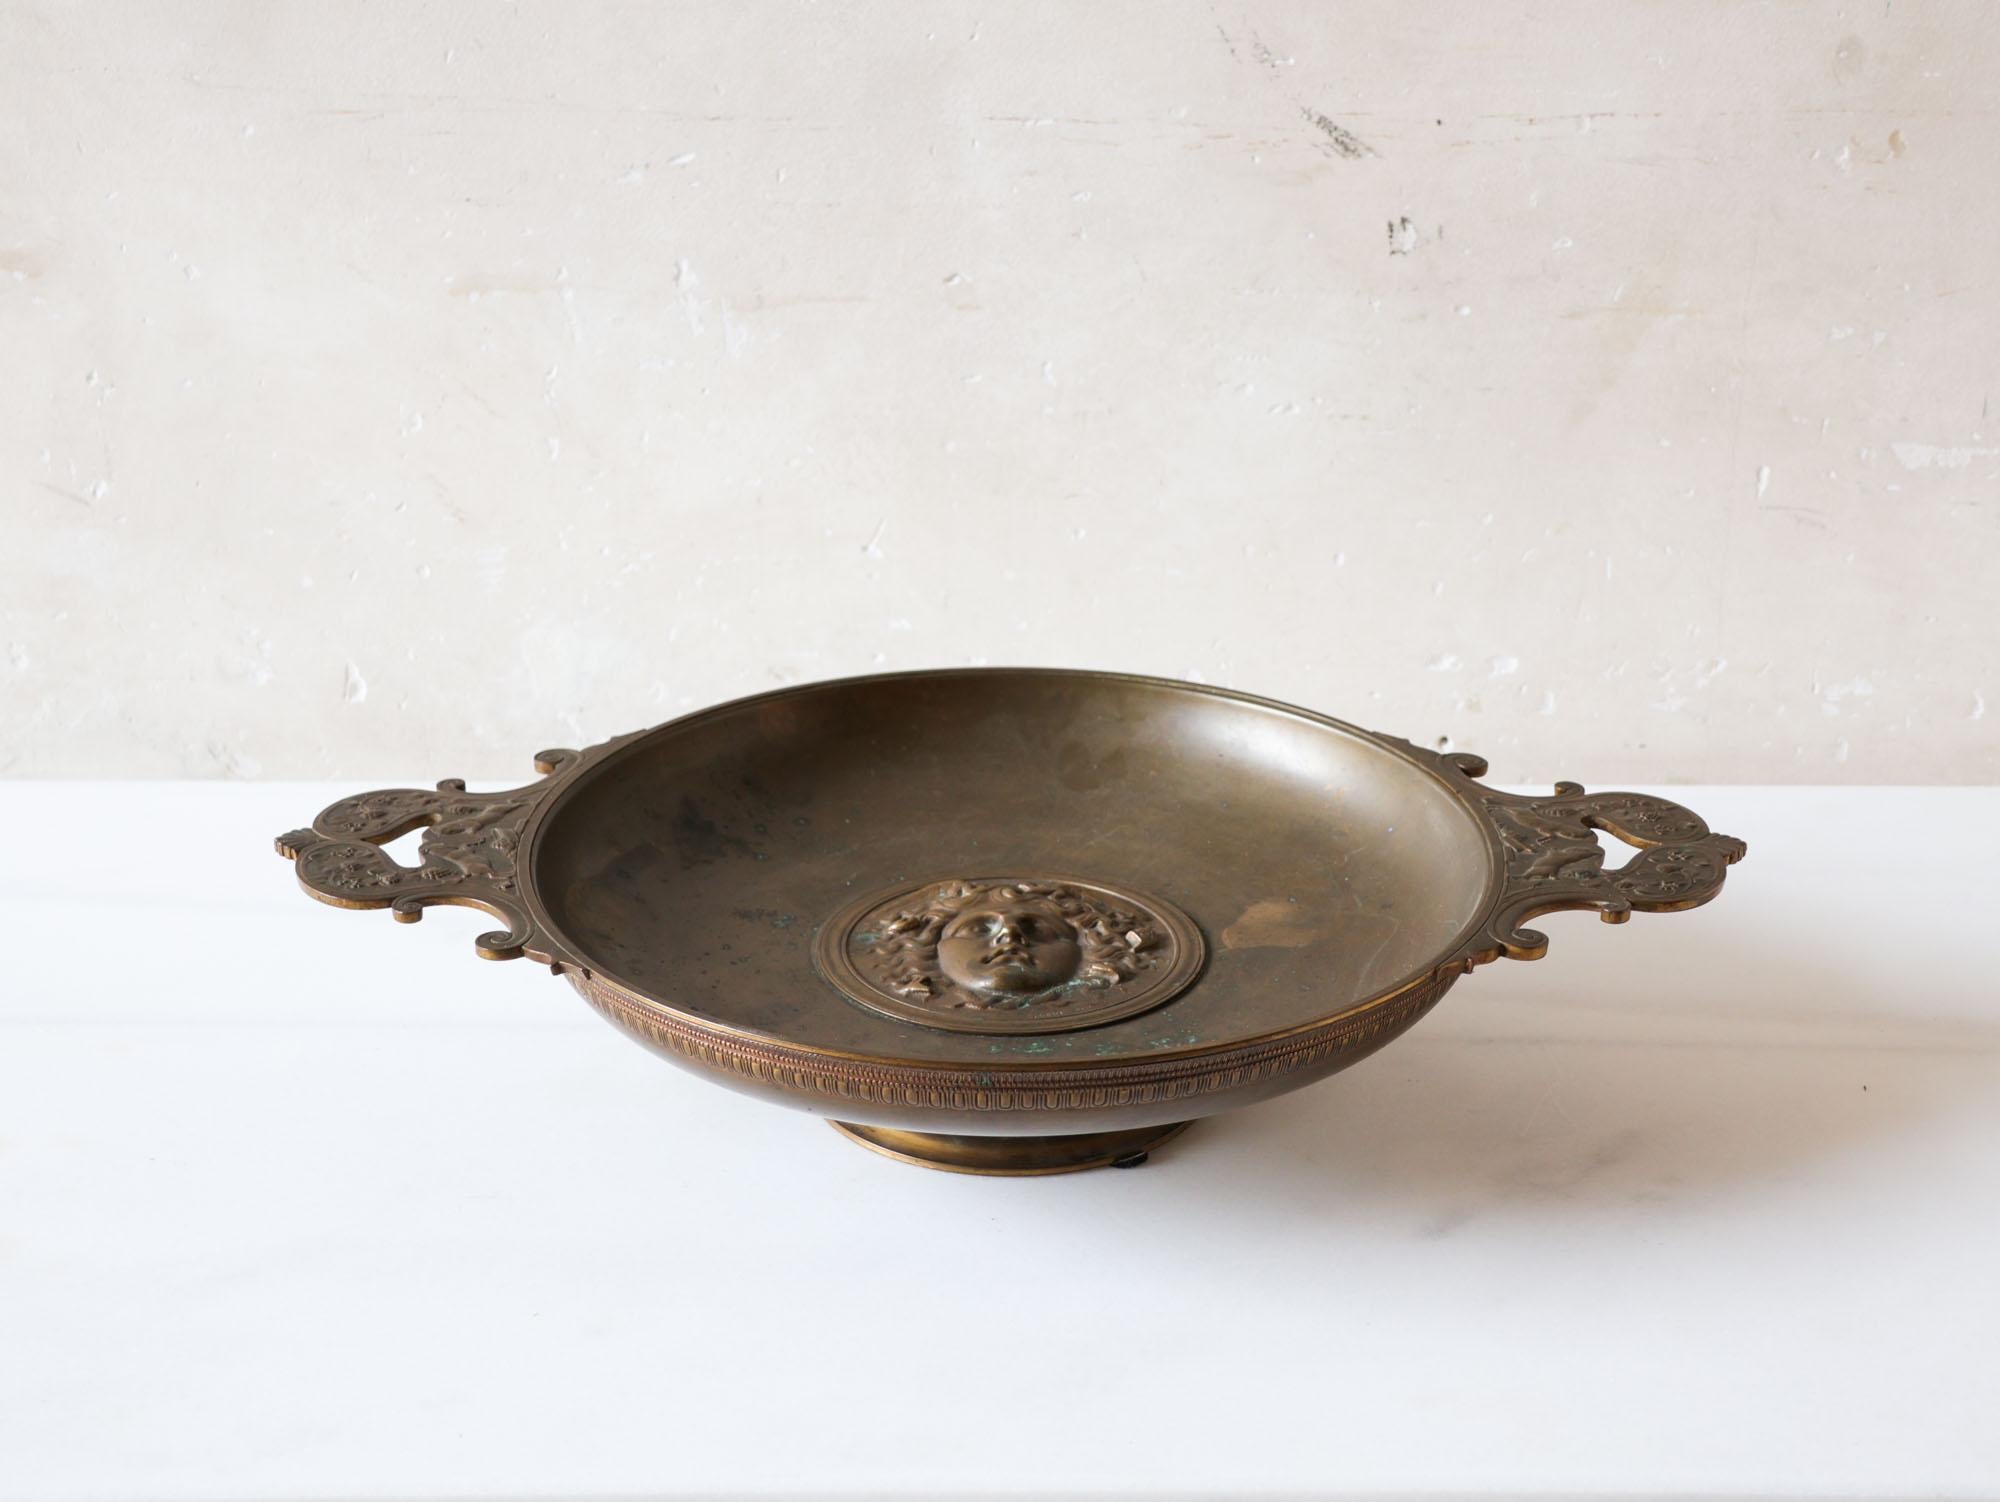 Italian bronze Grand Tour Tazza dish with Medusa. This Tazza or Compote from the 19th century is made entirely of bronze and is characterized by elegant handles and a central cartouche in the shape of Medusa, whose mouth is slightly opened and